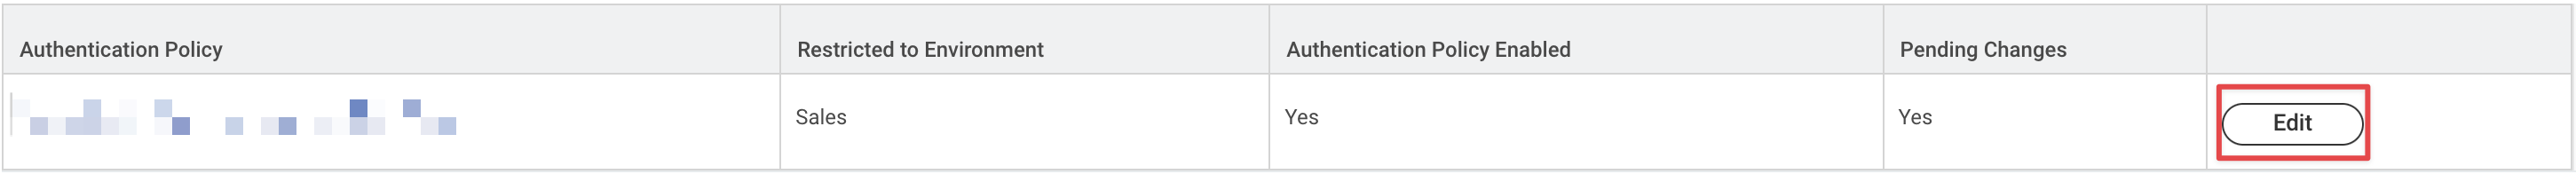 Authentication policy.png